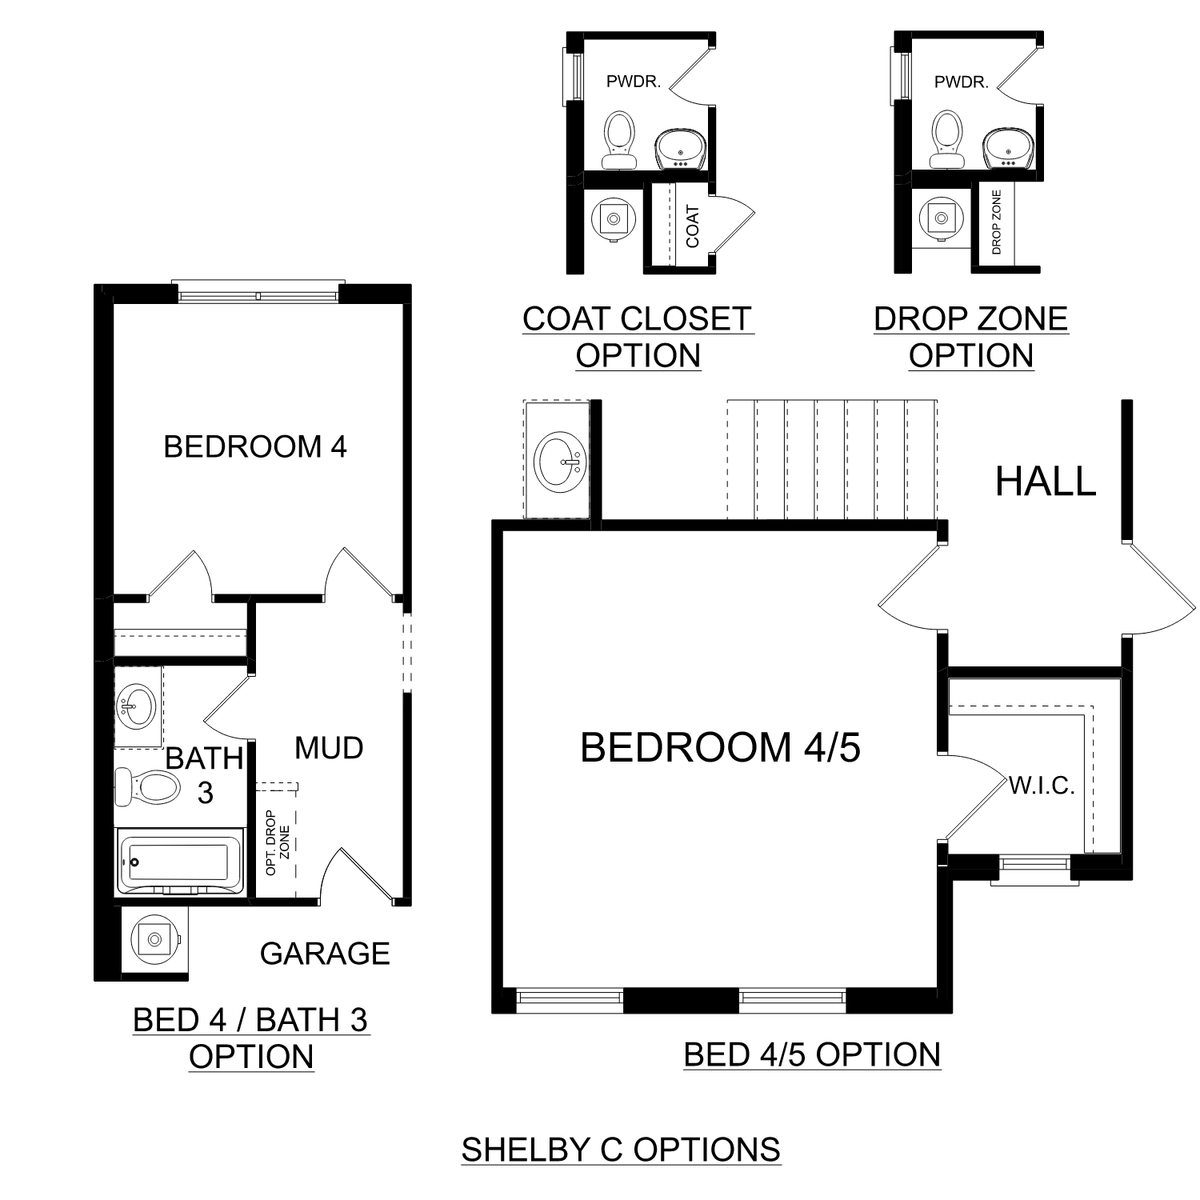 3 - The Shelby C - Side Entry floor plan layout for 123 Ivy Vine Drive in Davidson Homes' Ivy Hills community.